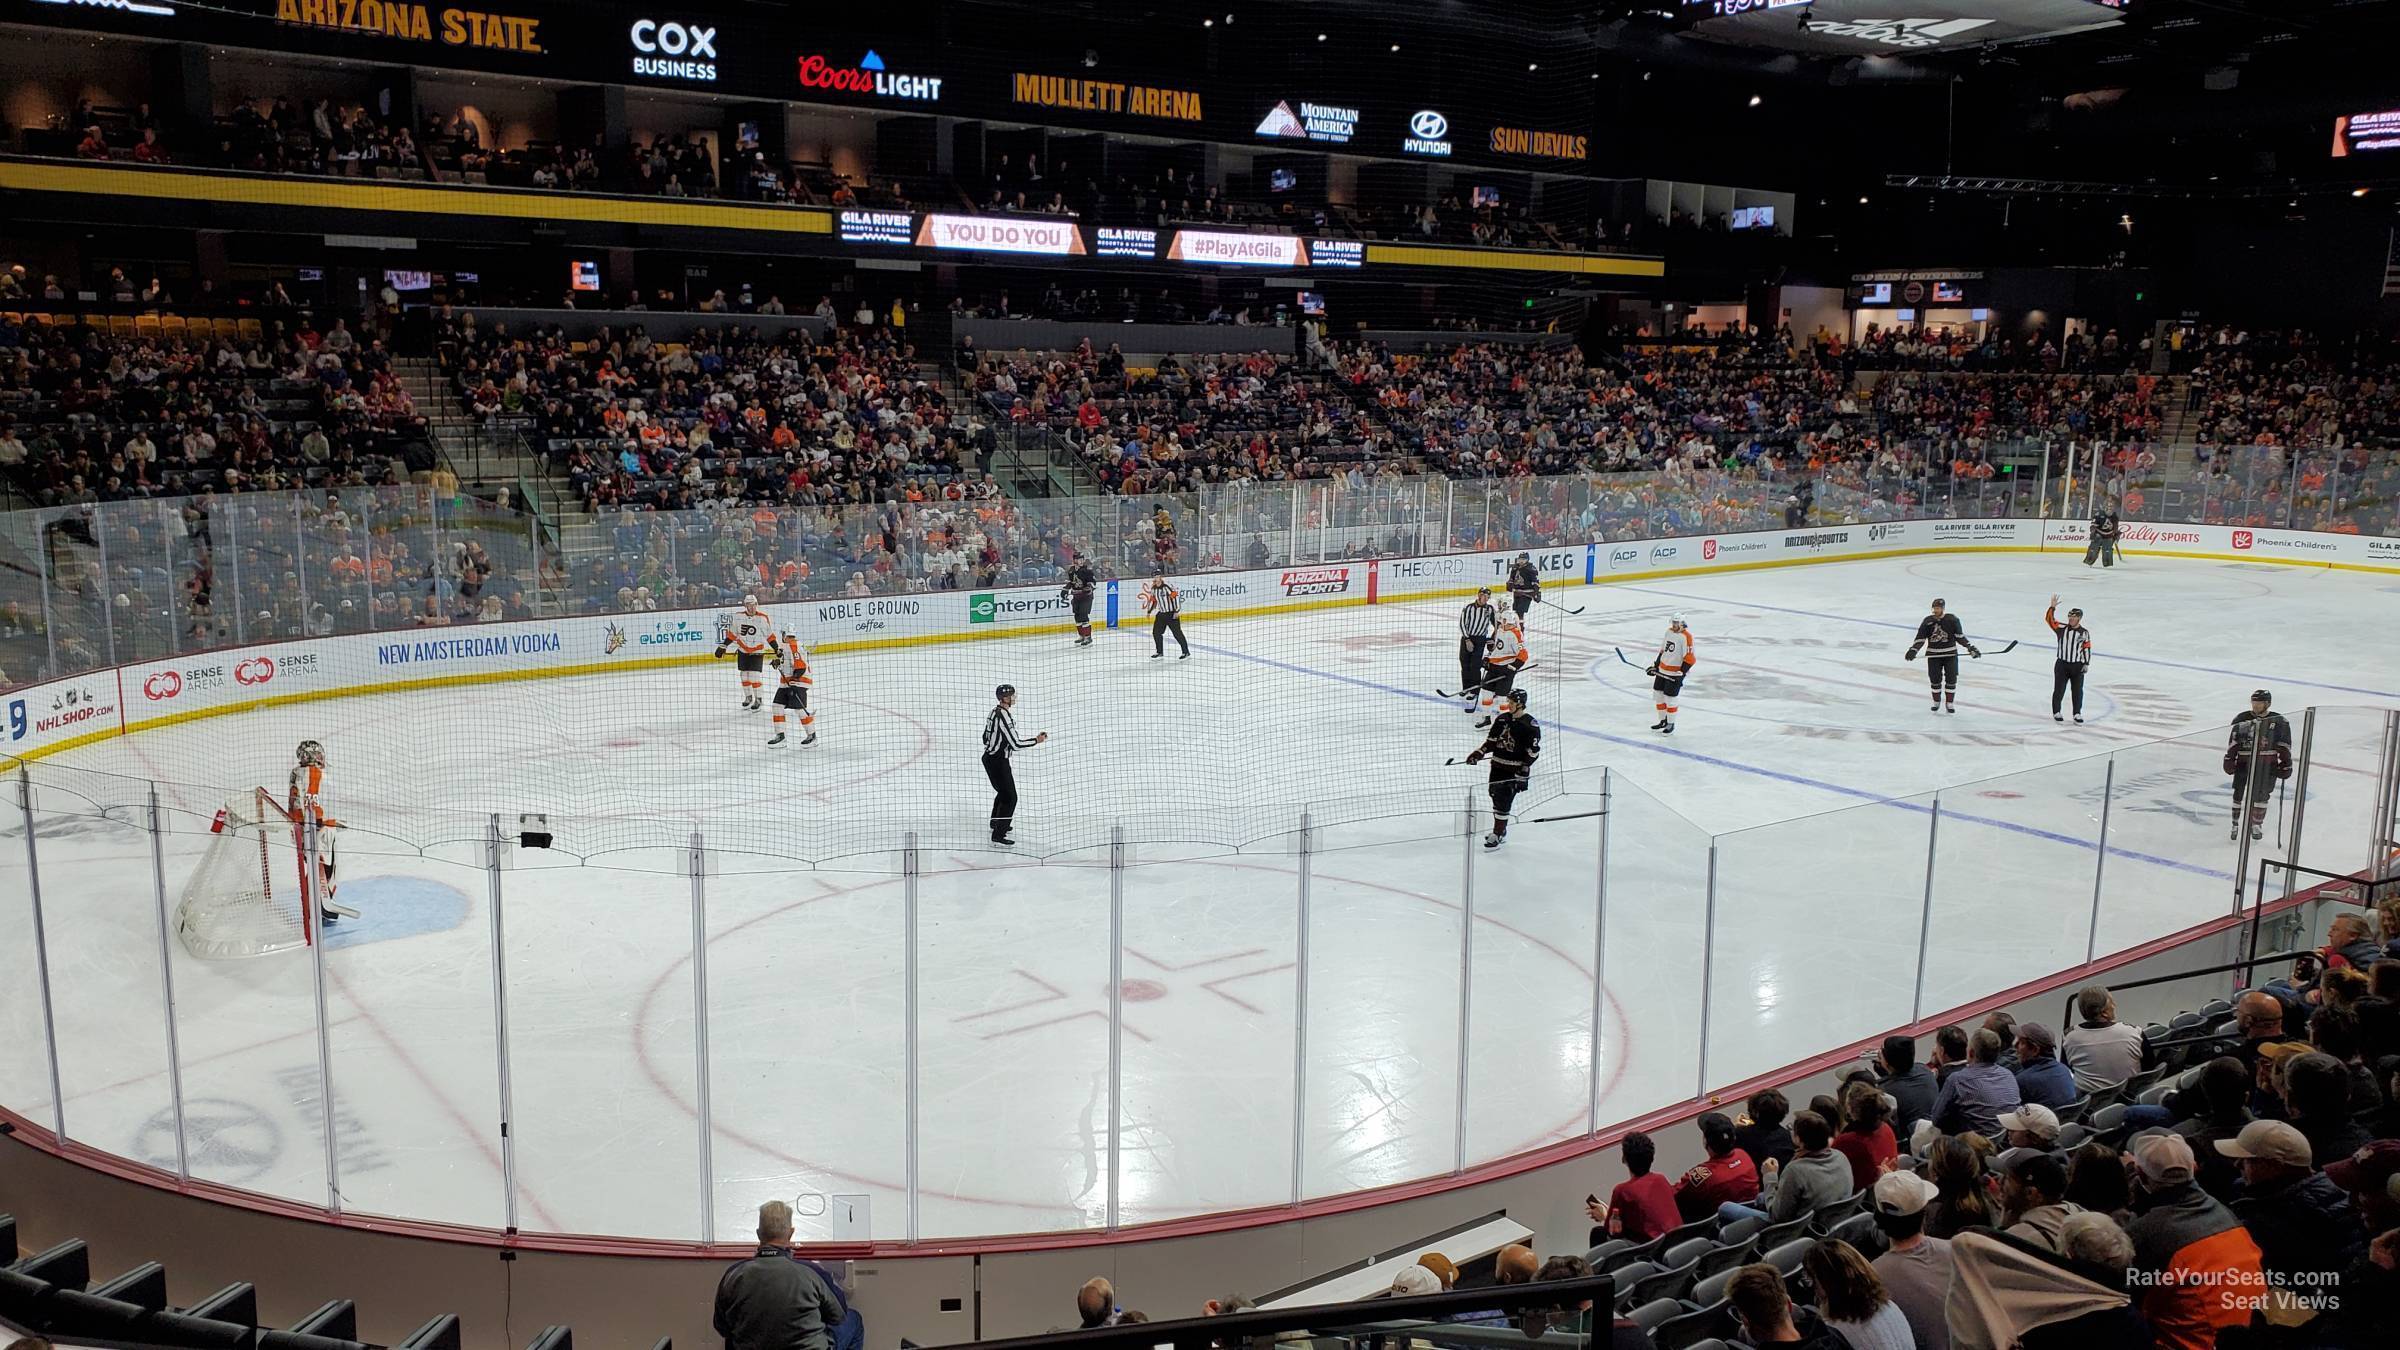 section 105, row wc seat view  - mullett arena